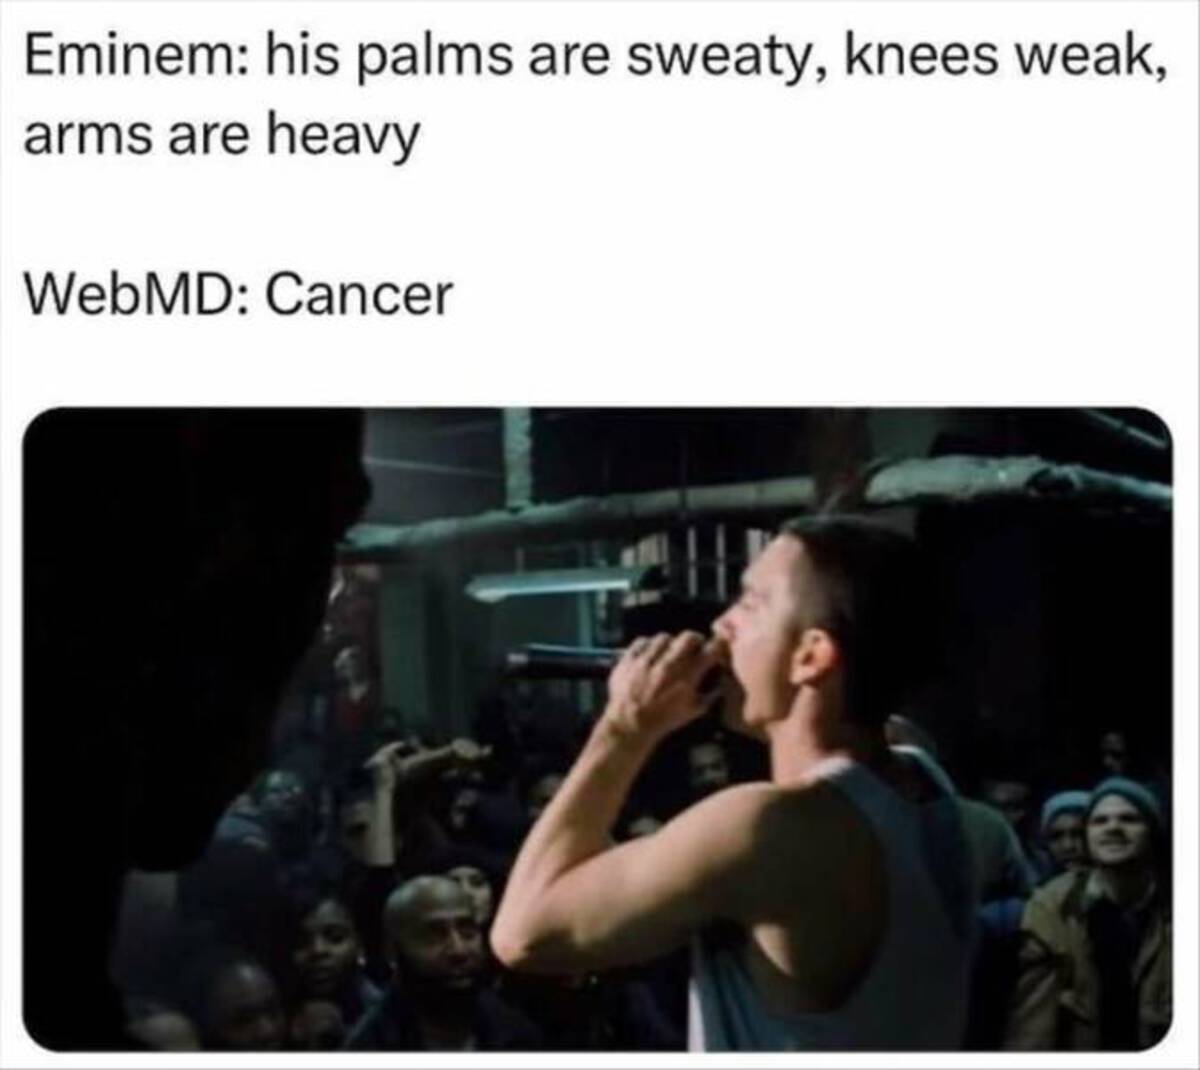 Internet meme - Eminem his palms are sweaty, knees weak, arms are heavy WebMD Cancer 29